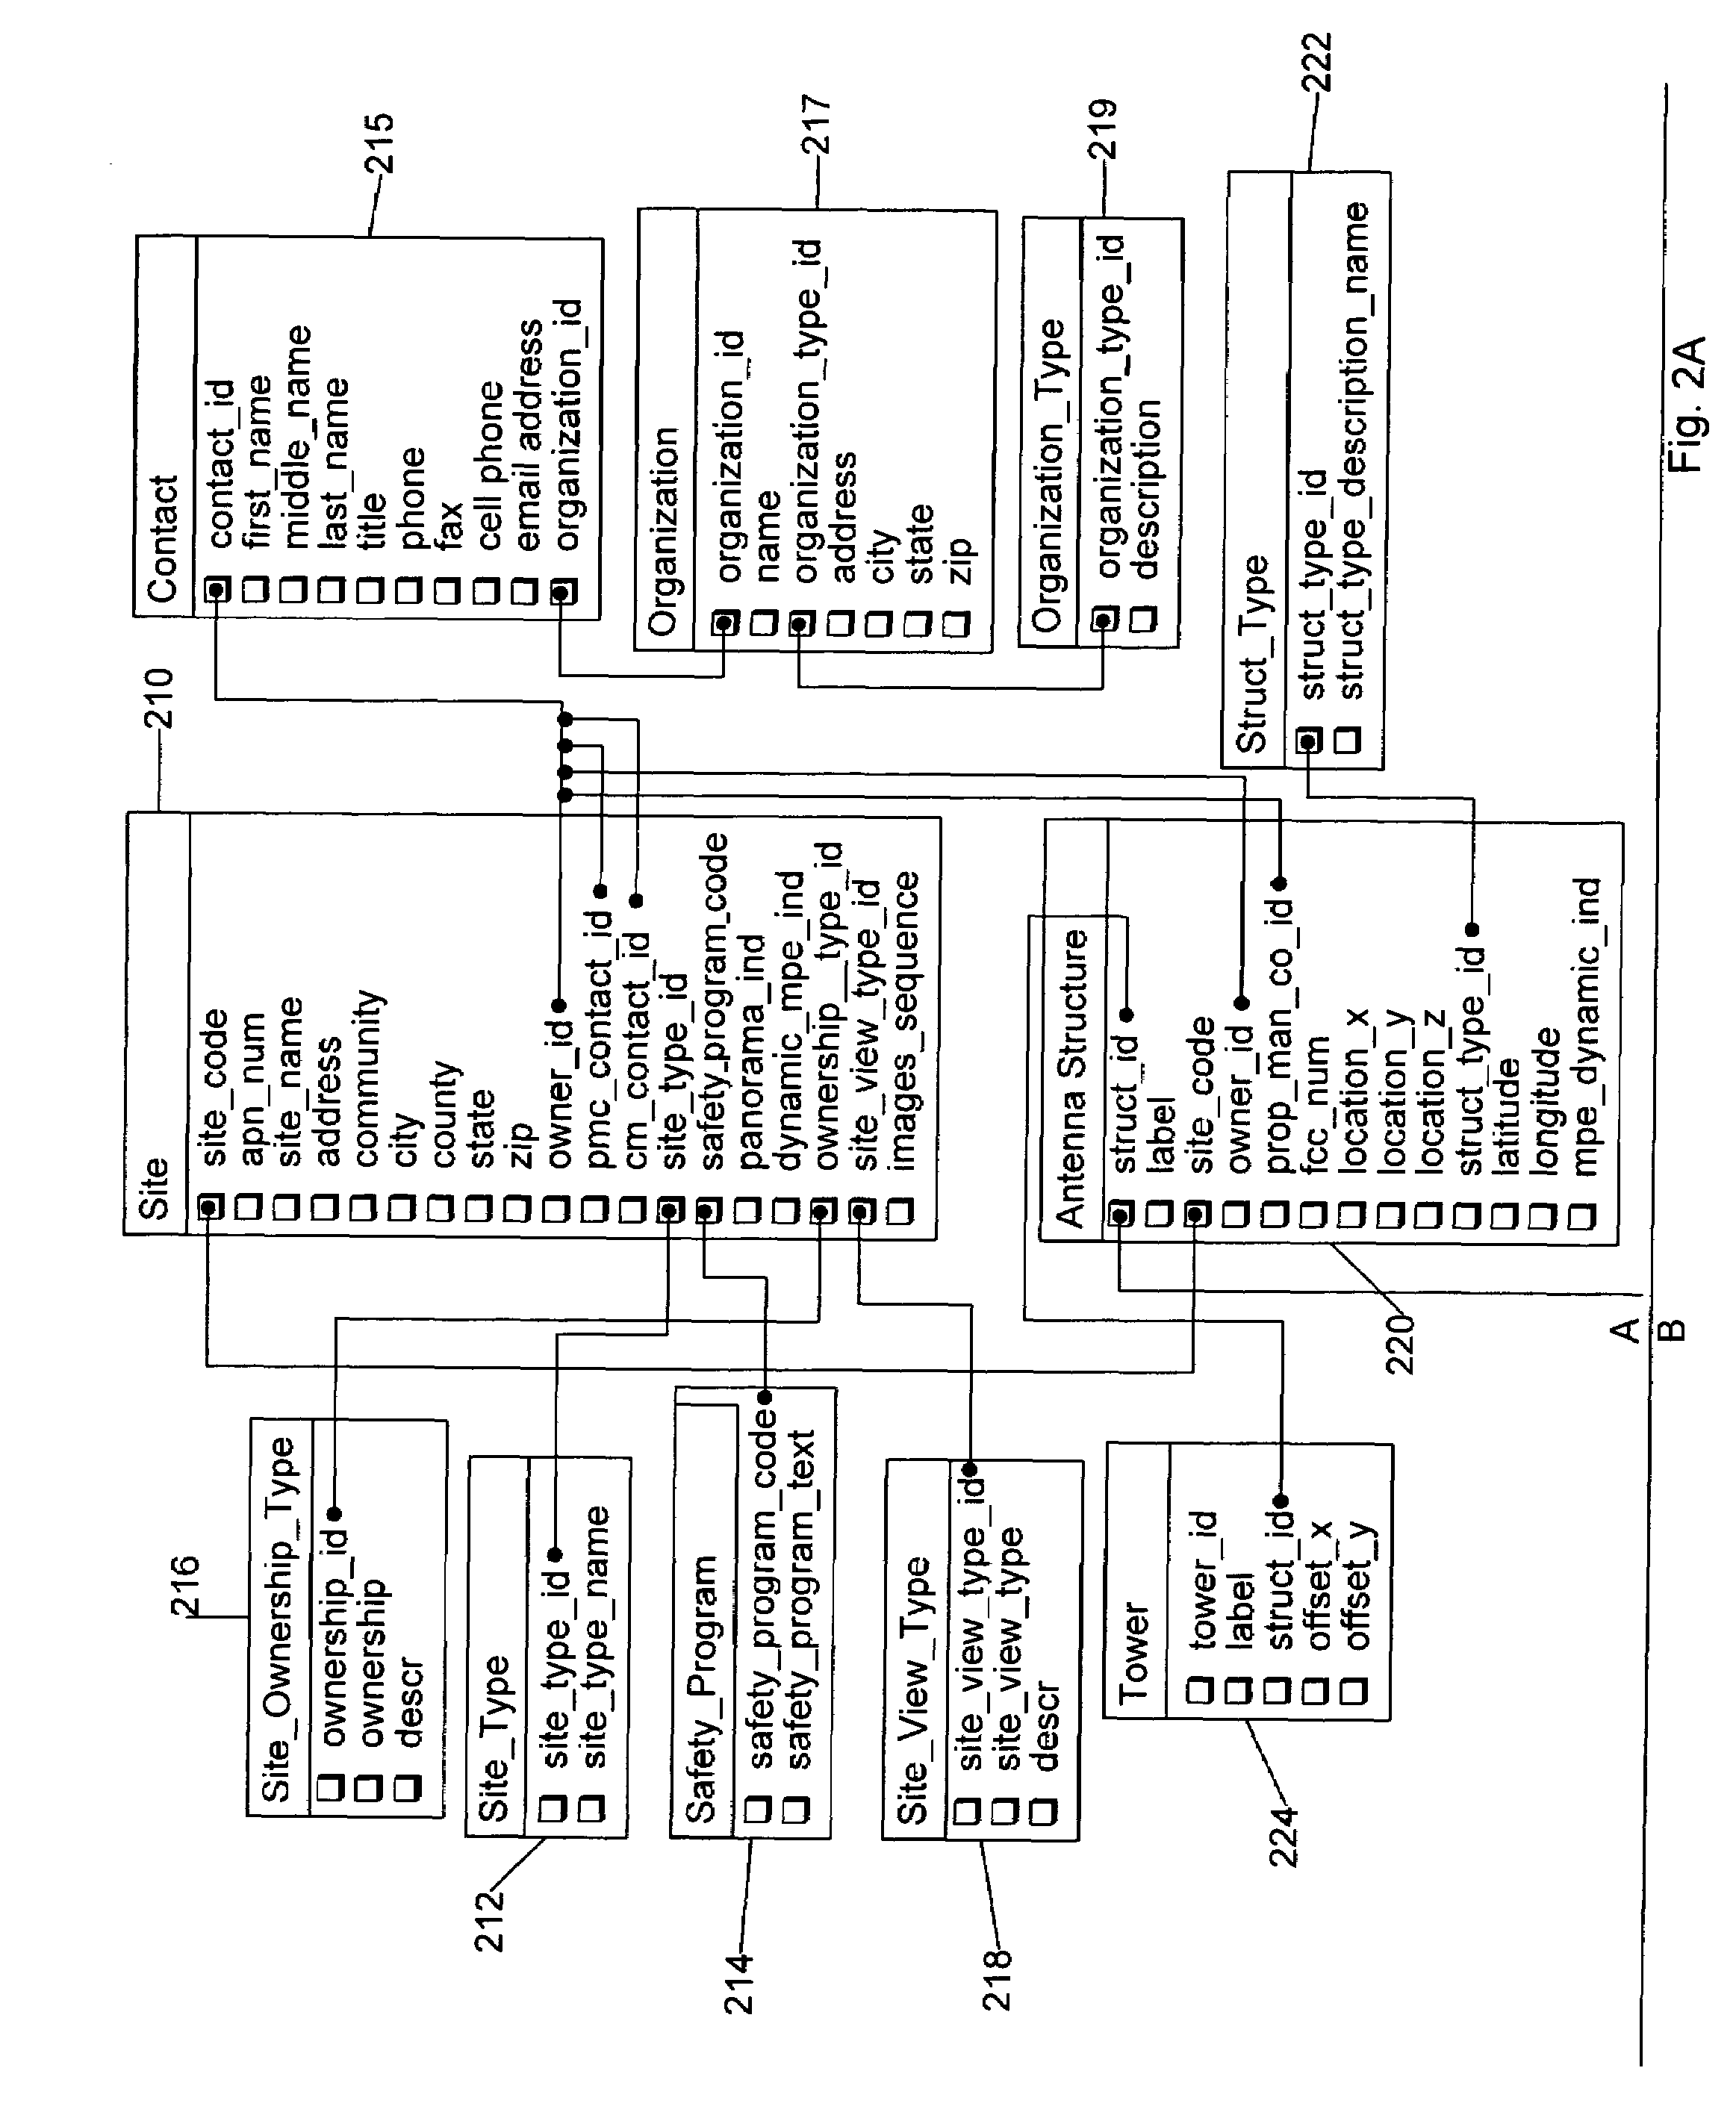 System and method for automated radio frequency safety and regulatory compliance at wireless transmission sites